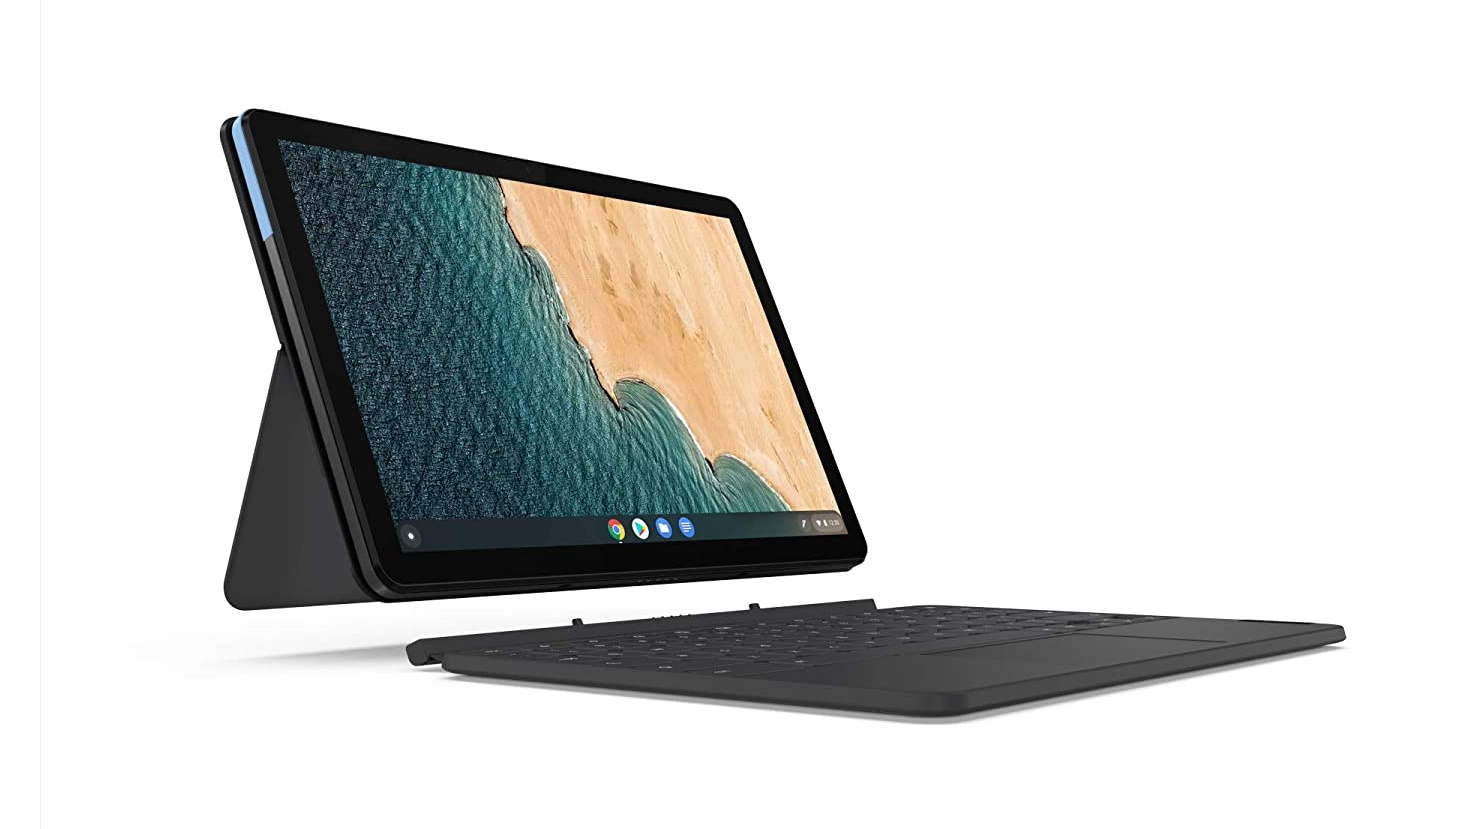 Lenovo IdeaPad Duet Chromebook delivers two form factors in one, while utilizing the versatility of the Chrome OS and packing incredibly long life.